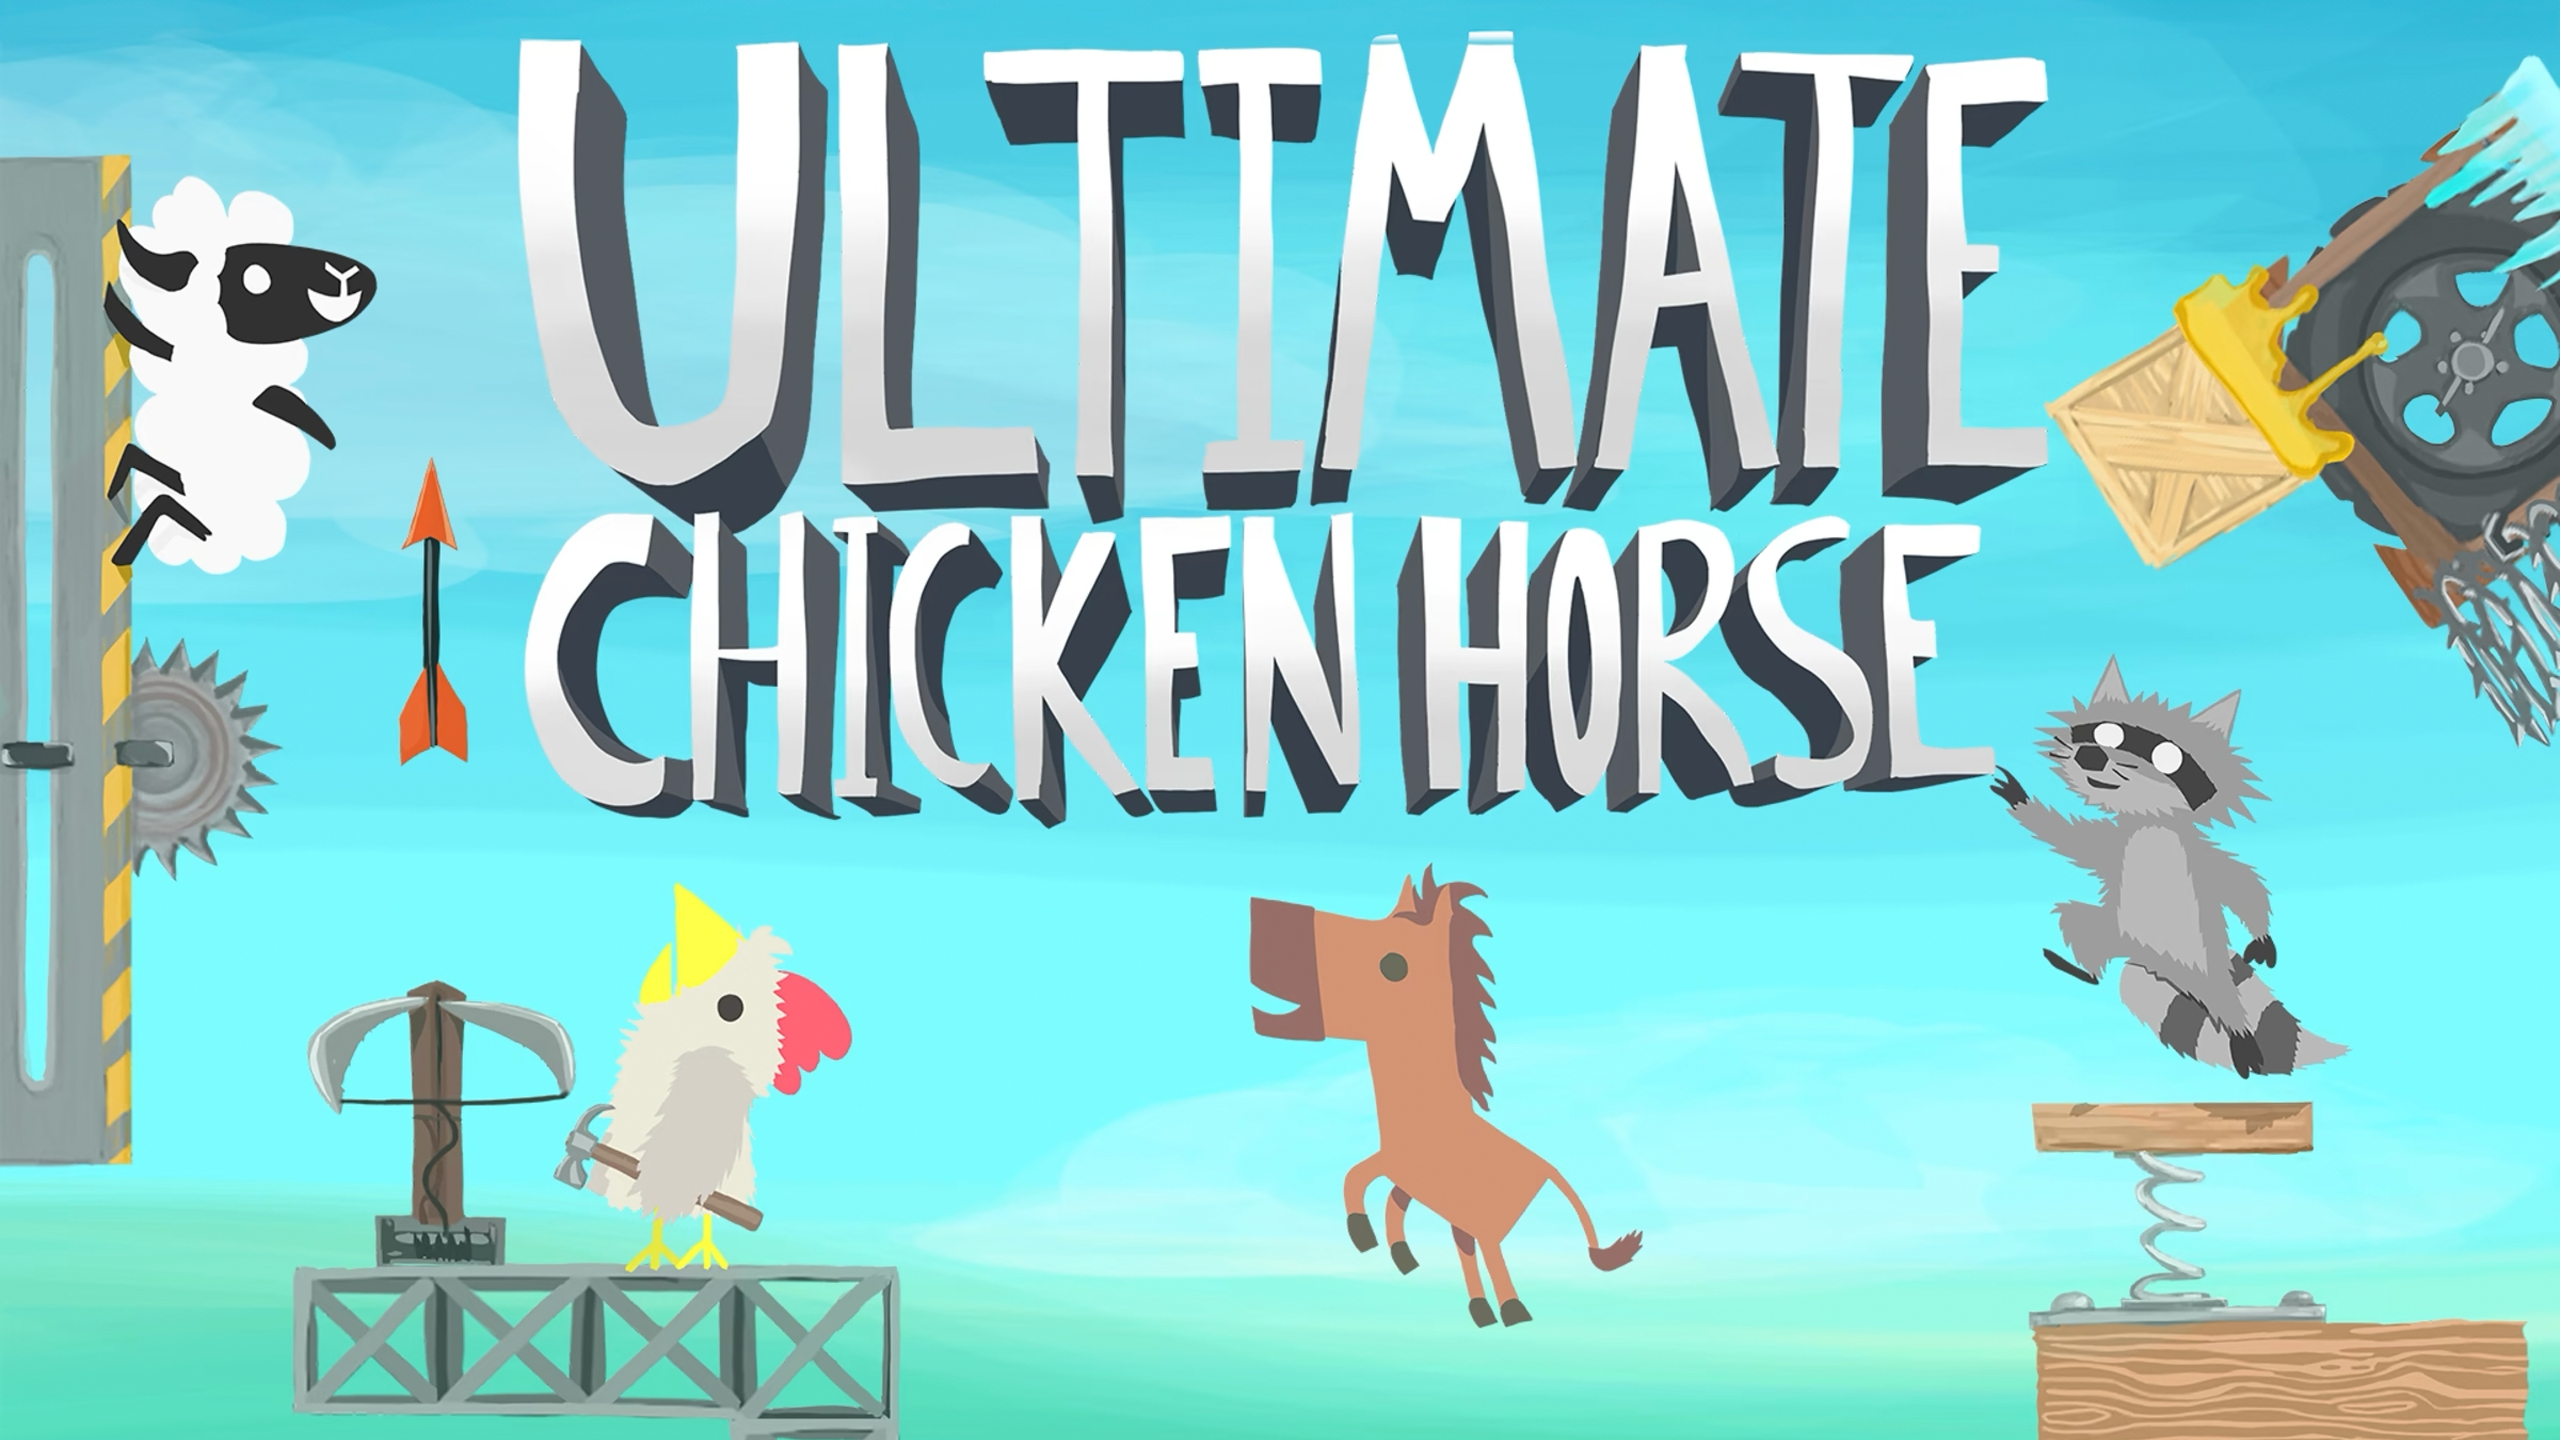 ultimate chicken horse switch